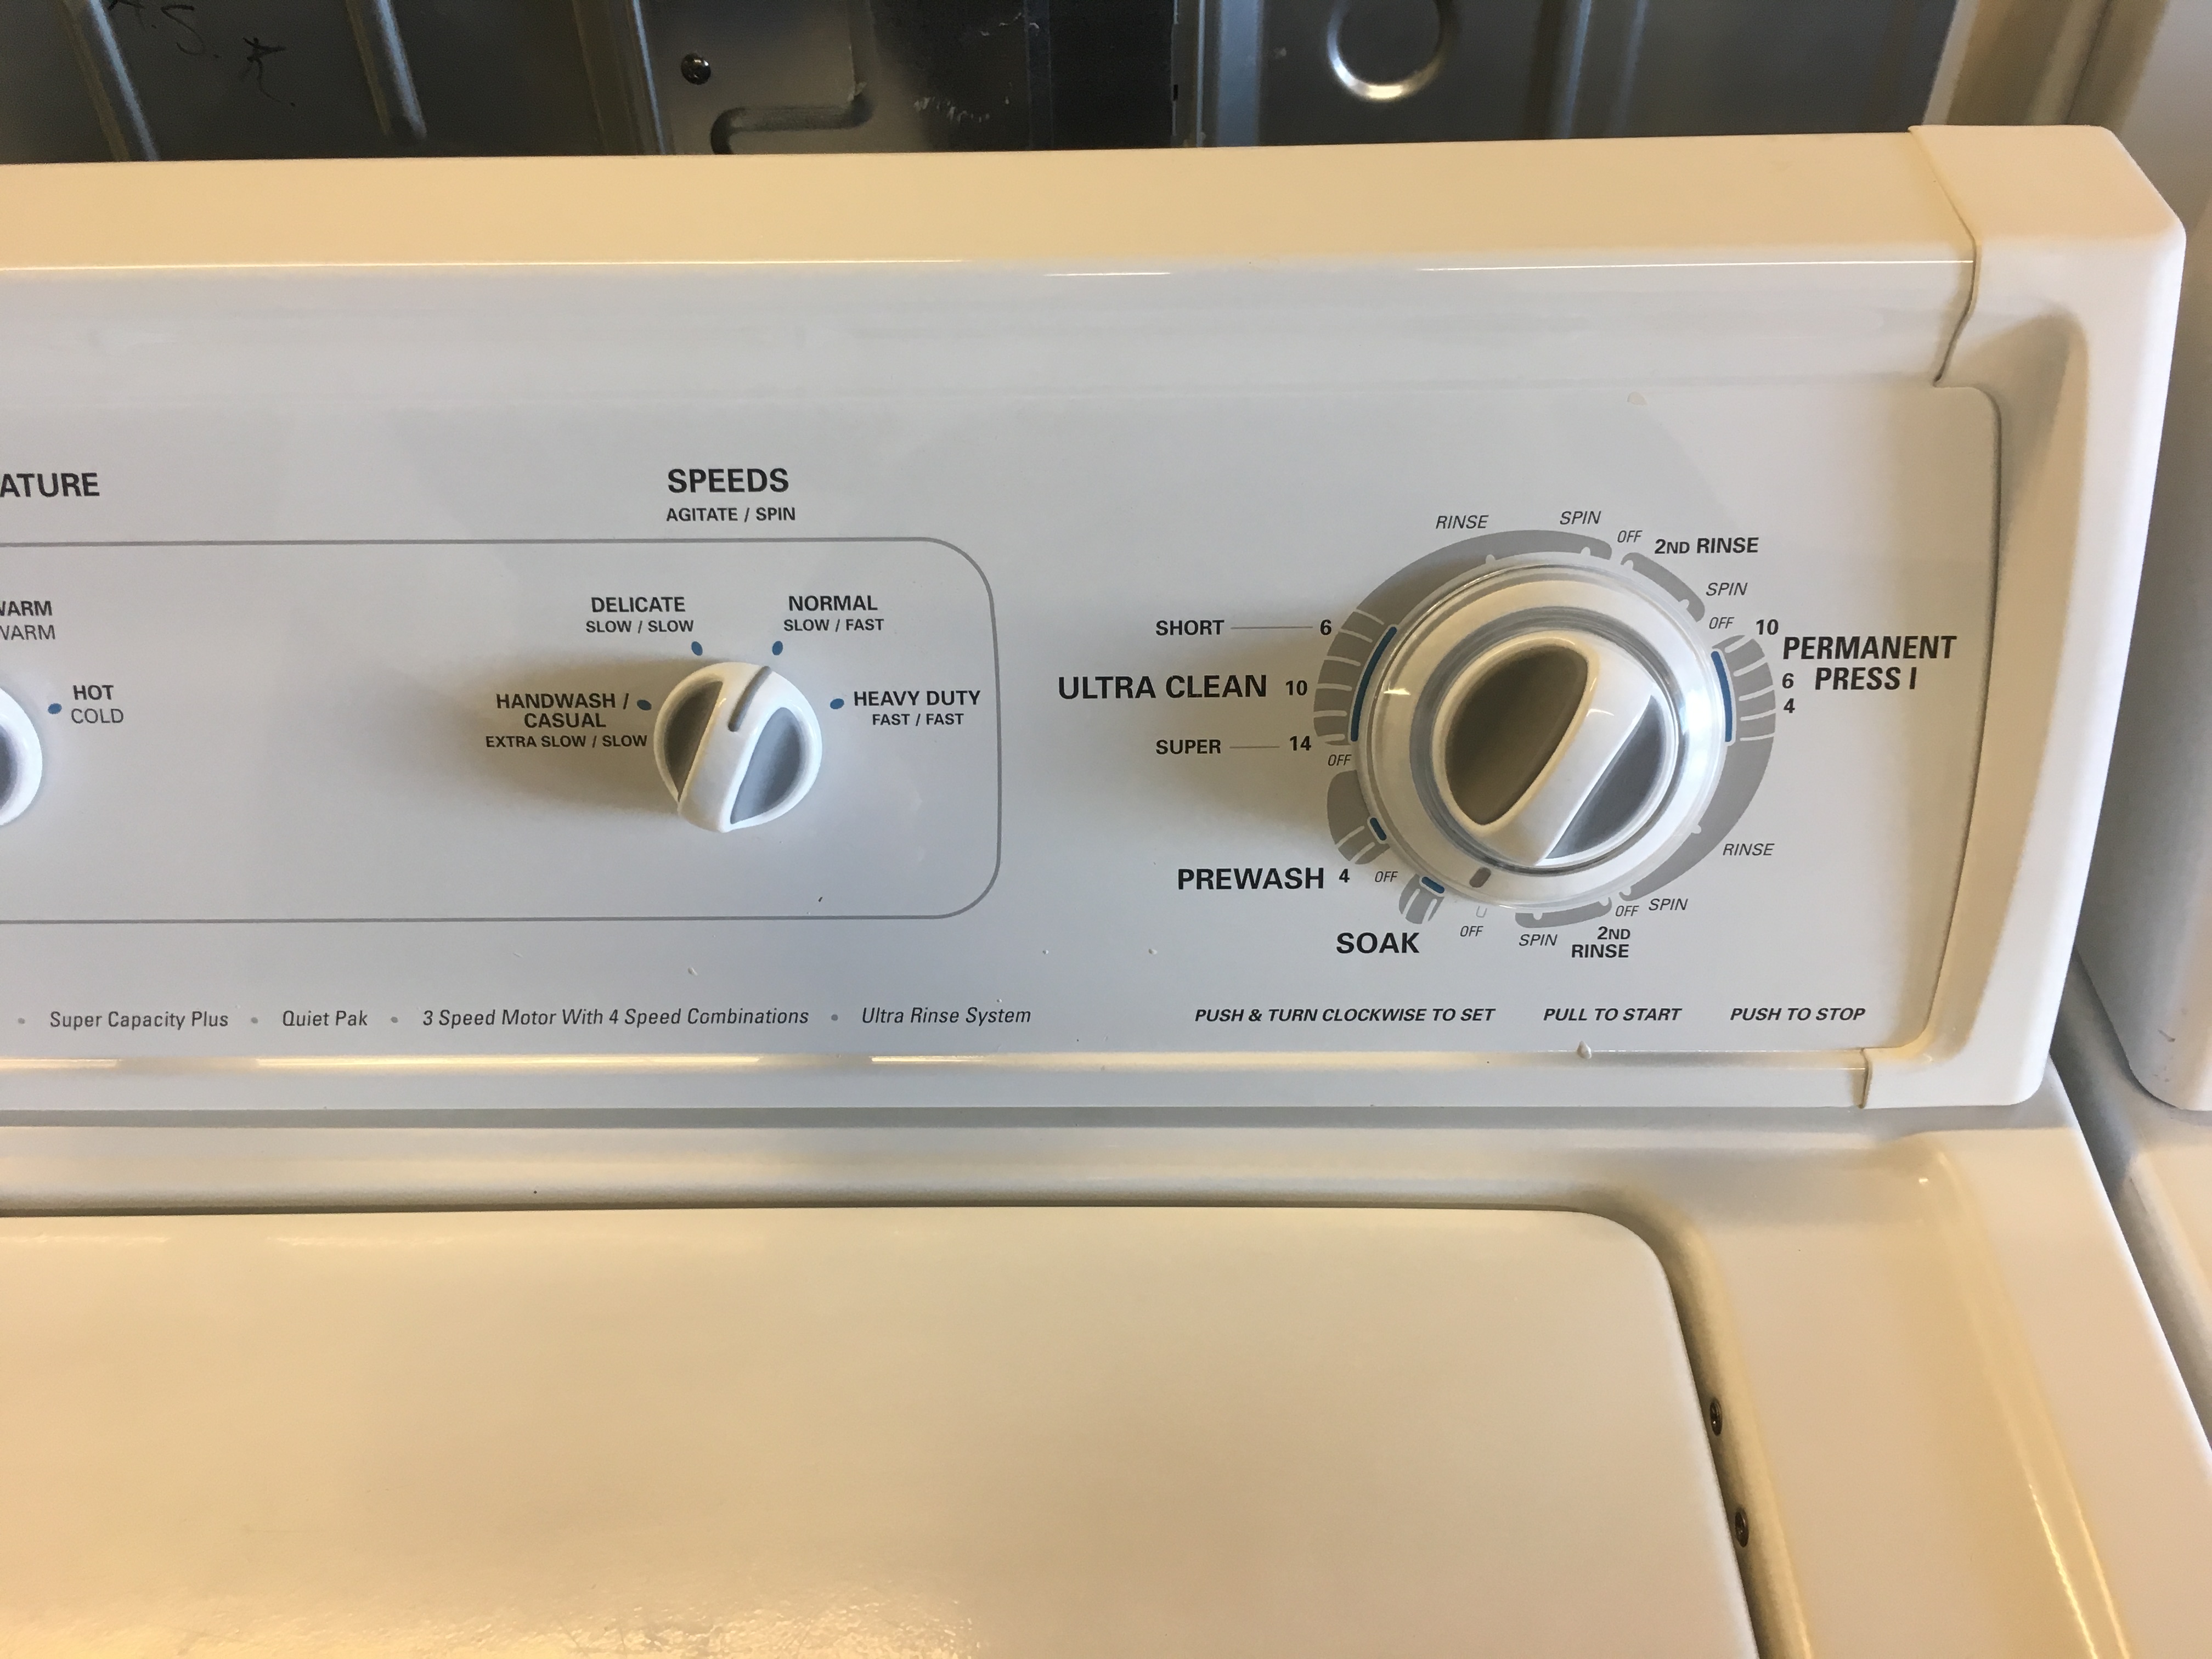 Undisputed G.O.A.T, Kenmore Direct Drive 80 Series Top-Load Washer & Dryer Set Quality Refurbished with 1-Year Warranty INCLUDED!